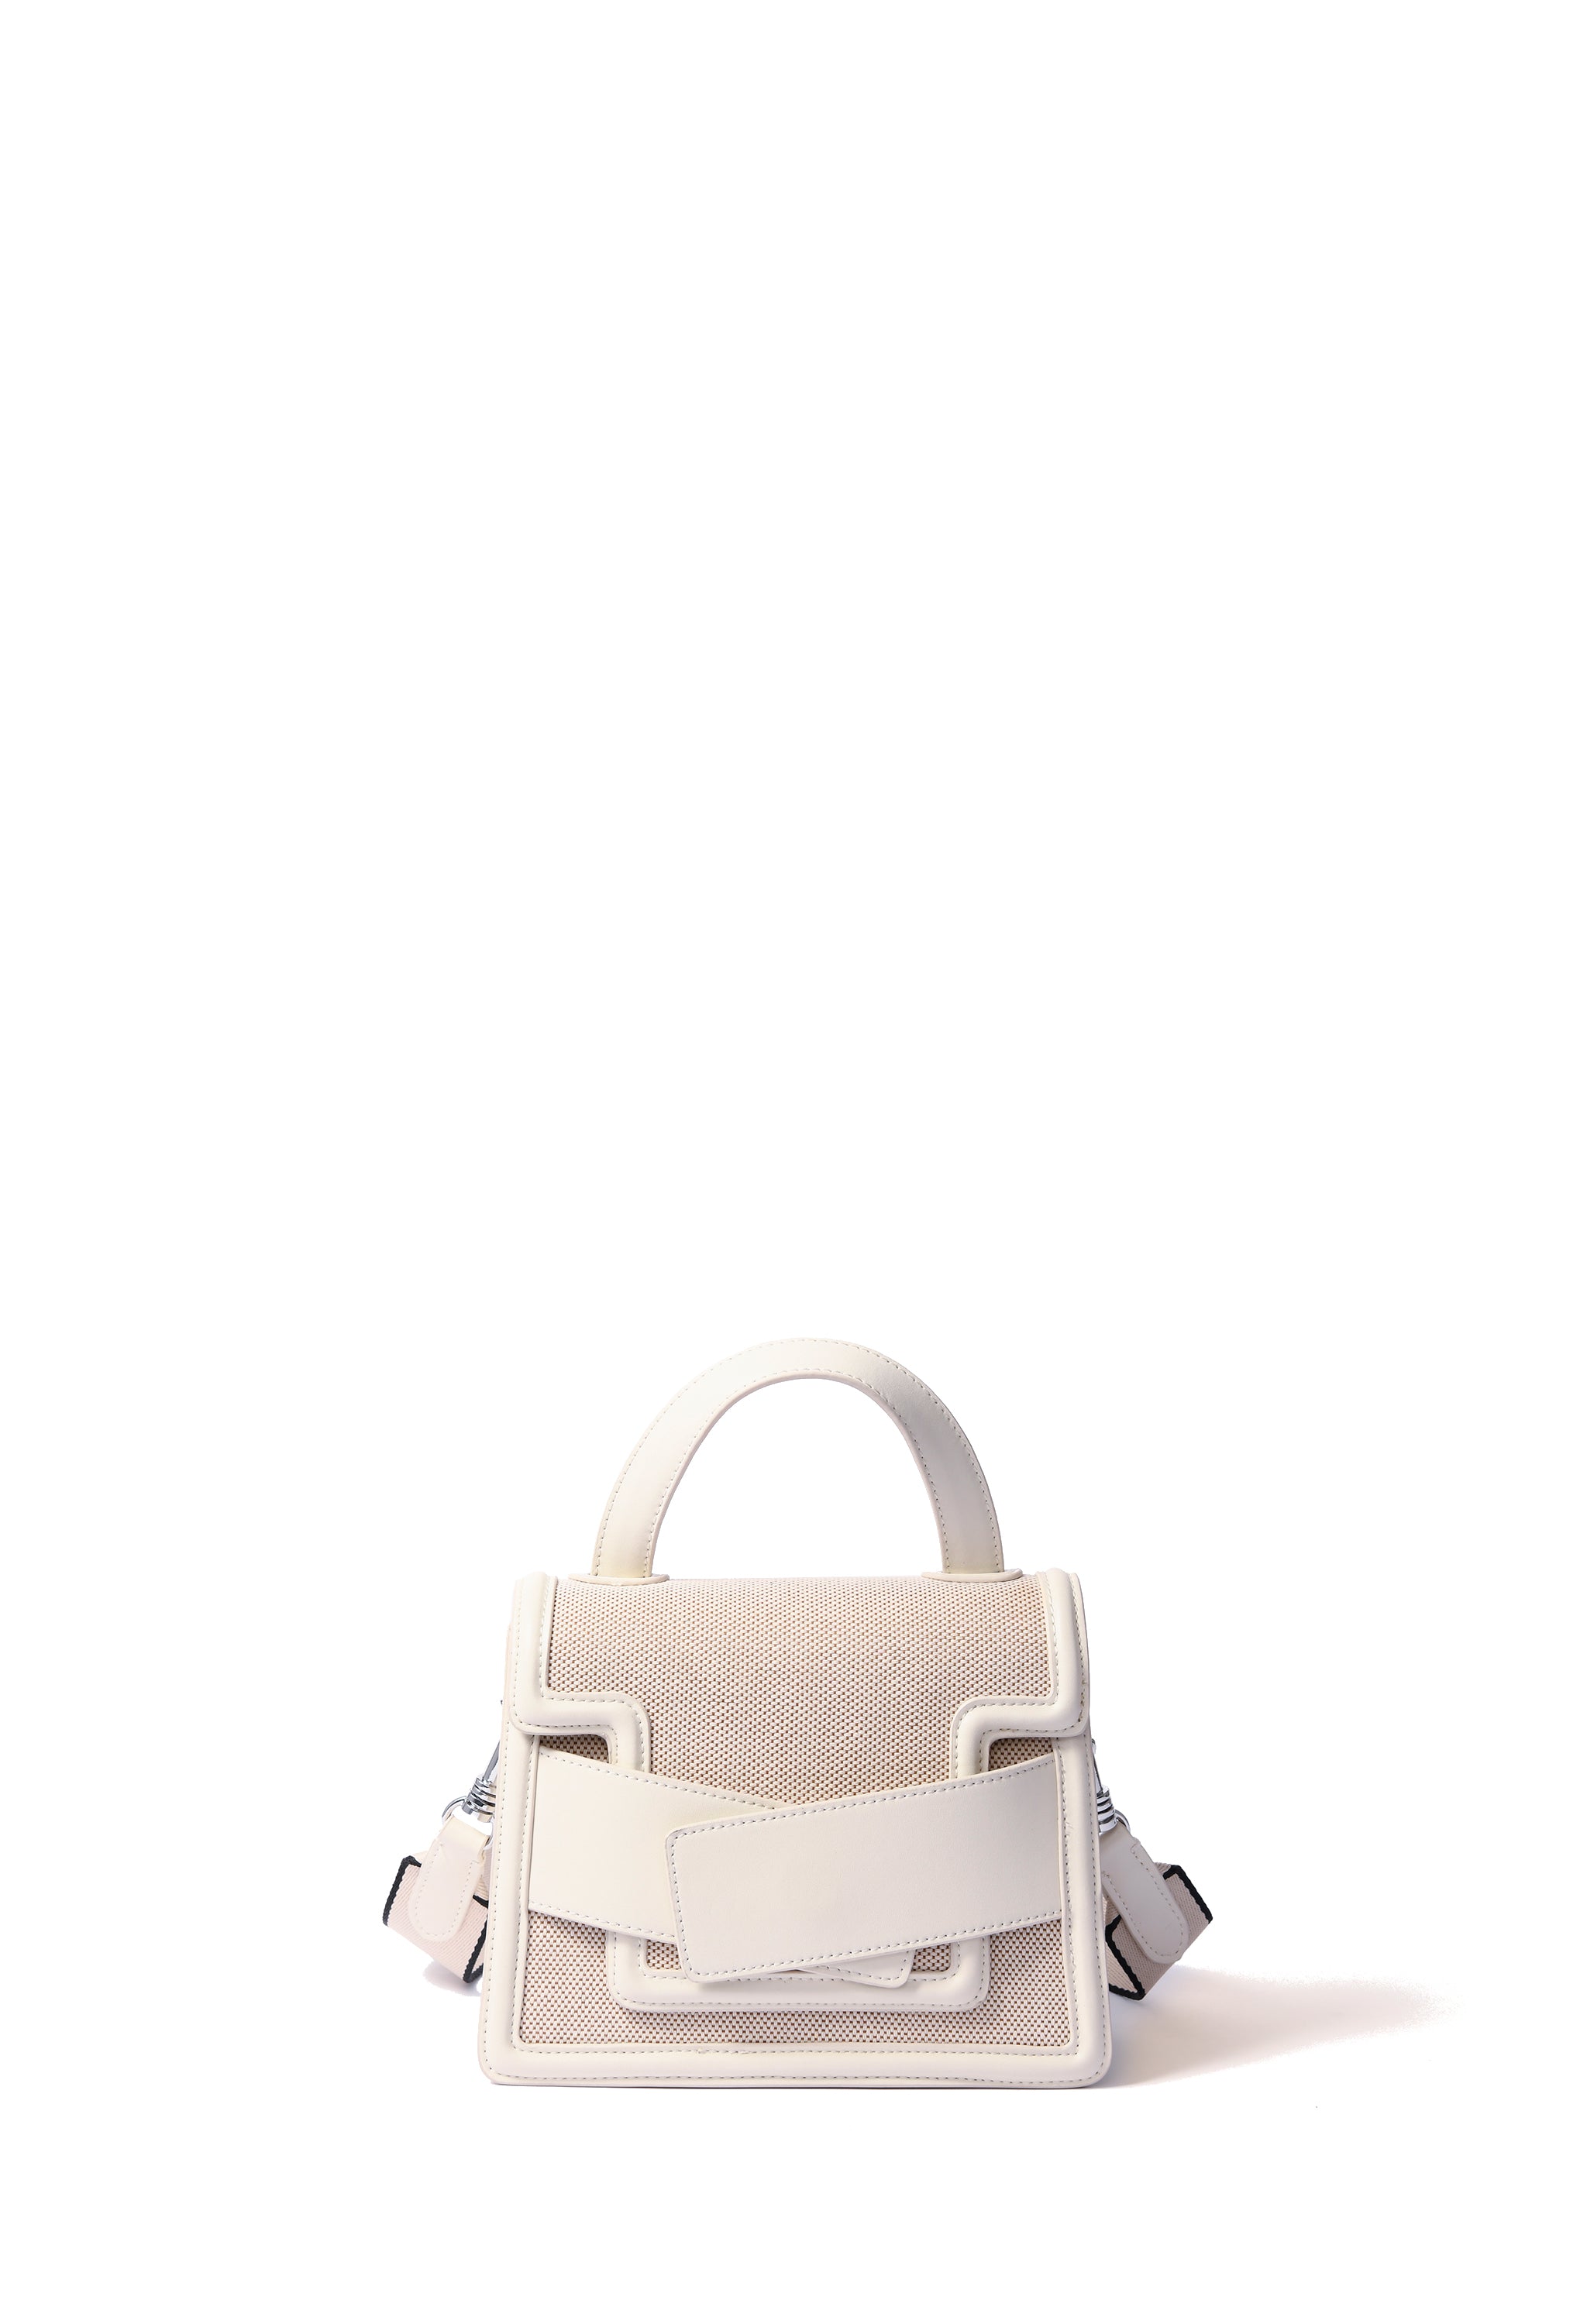 Evelyn Bag in canvas and genuine leather, White BOB ORE blue collection on sale 2022